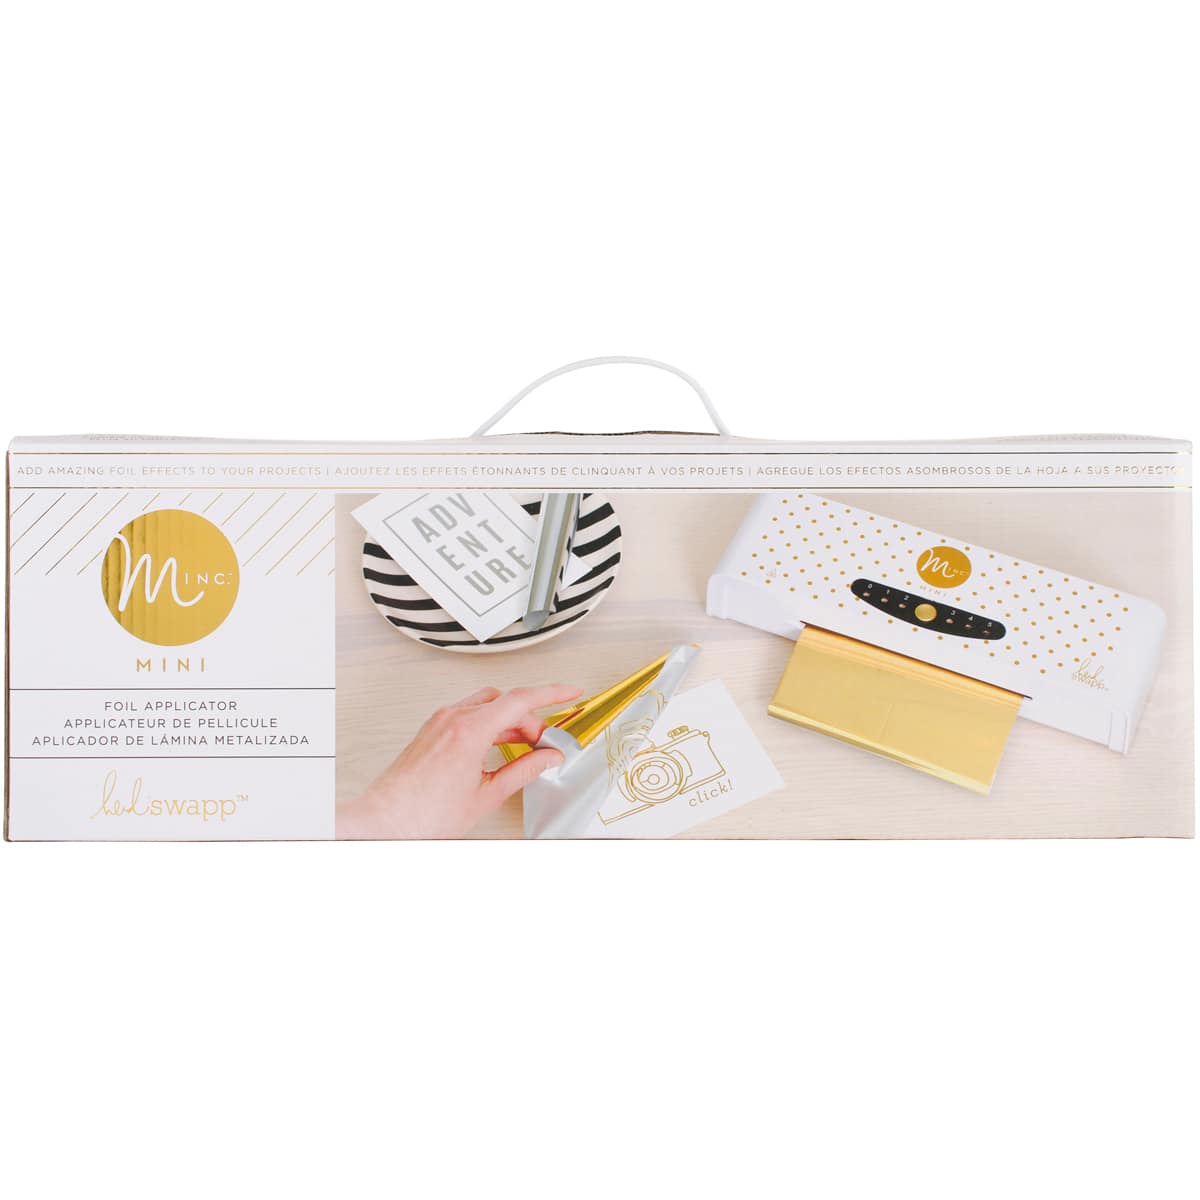 review of the Minc Foil Applicator from Heidi Swapp - how to use